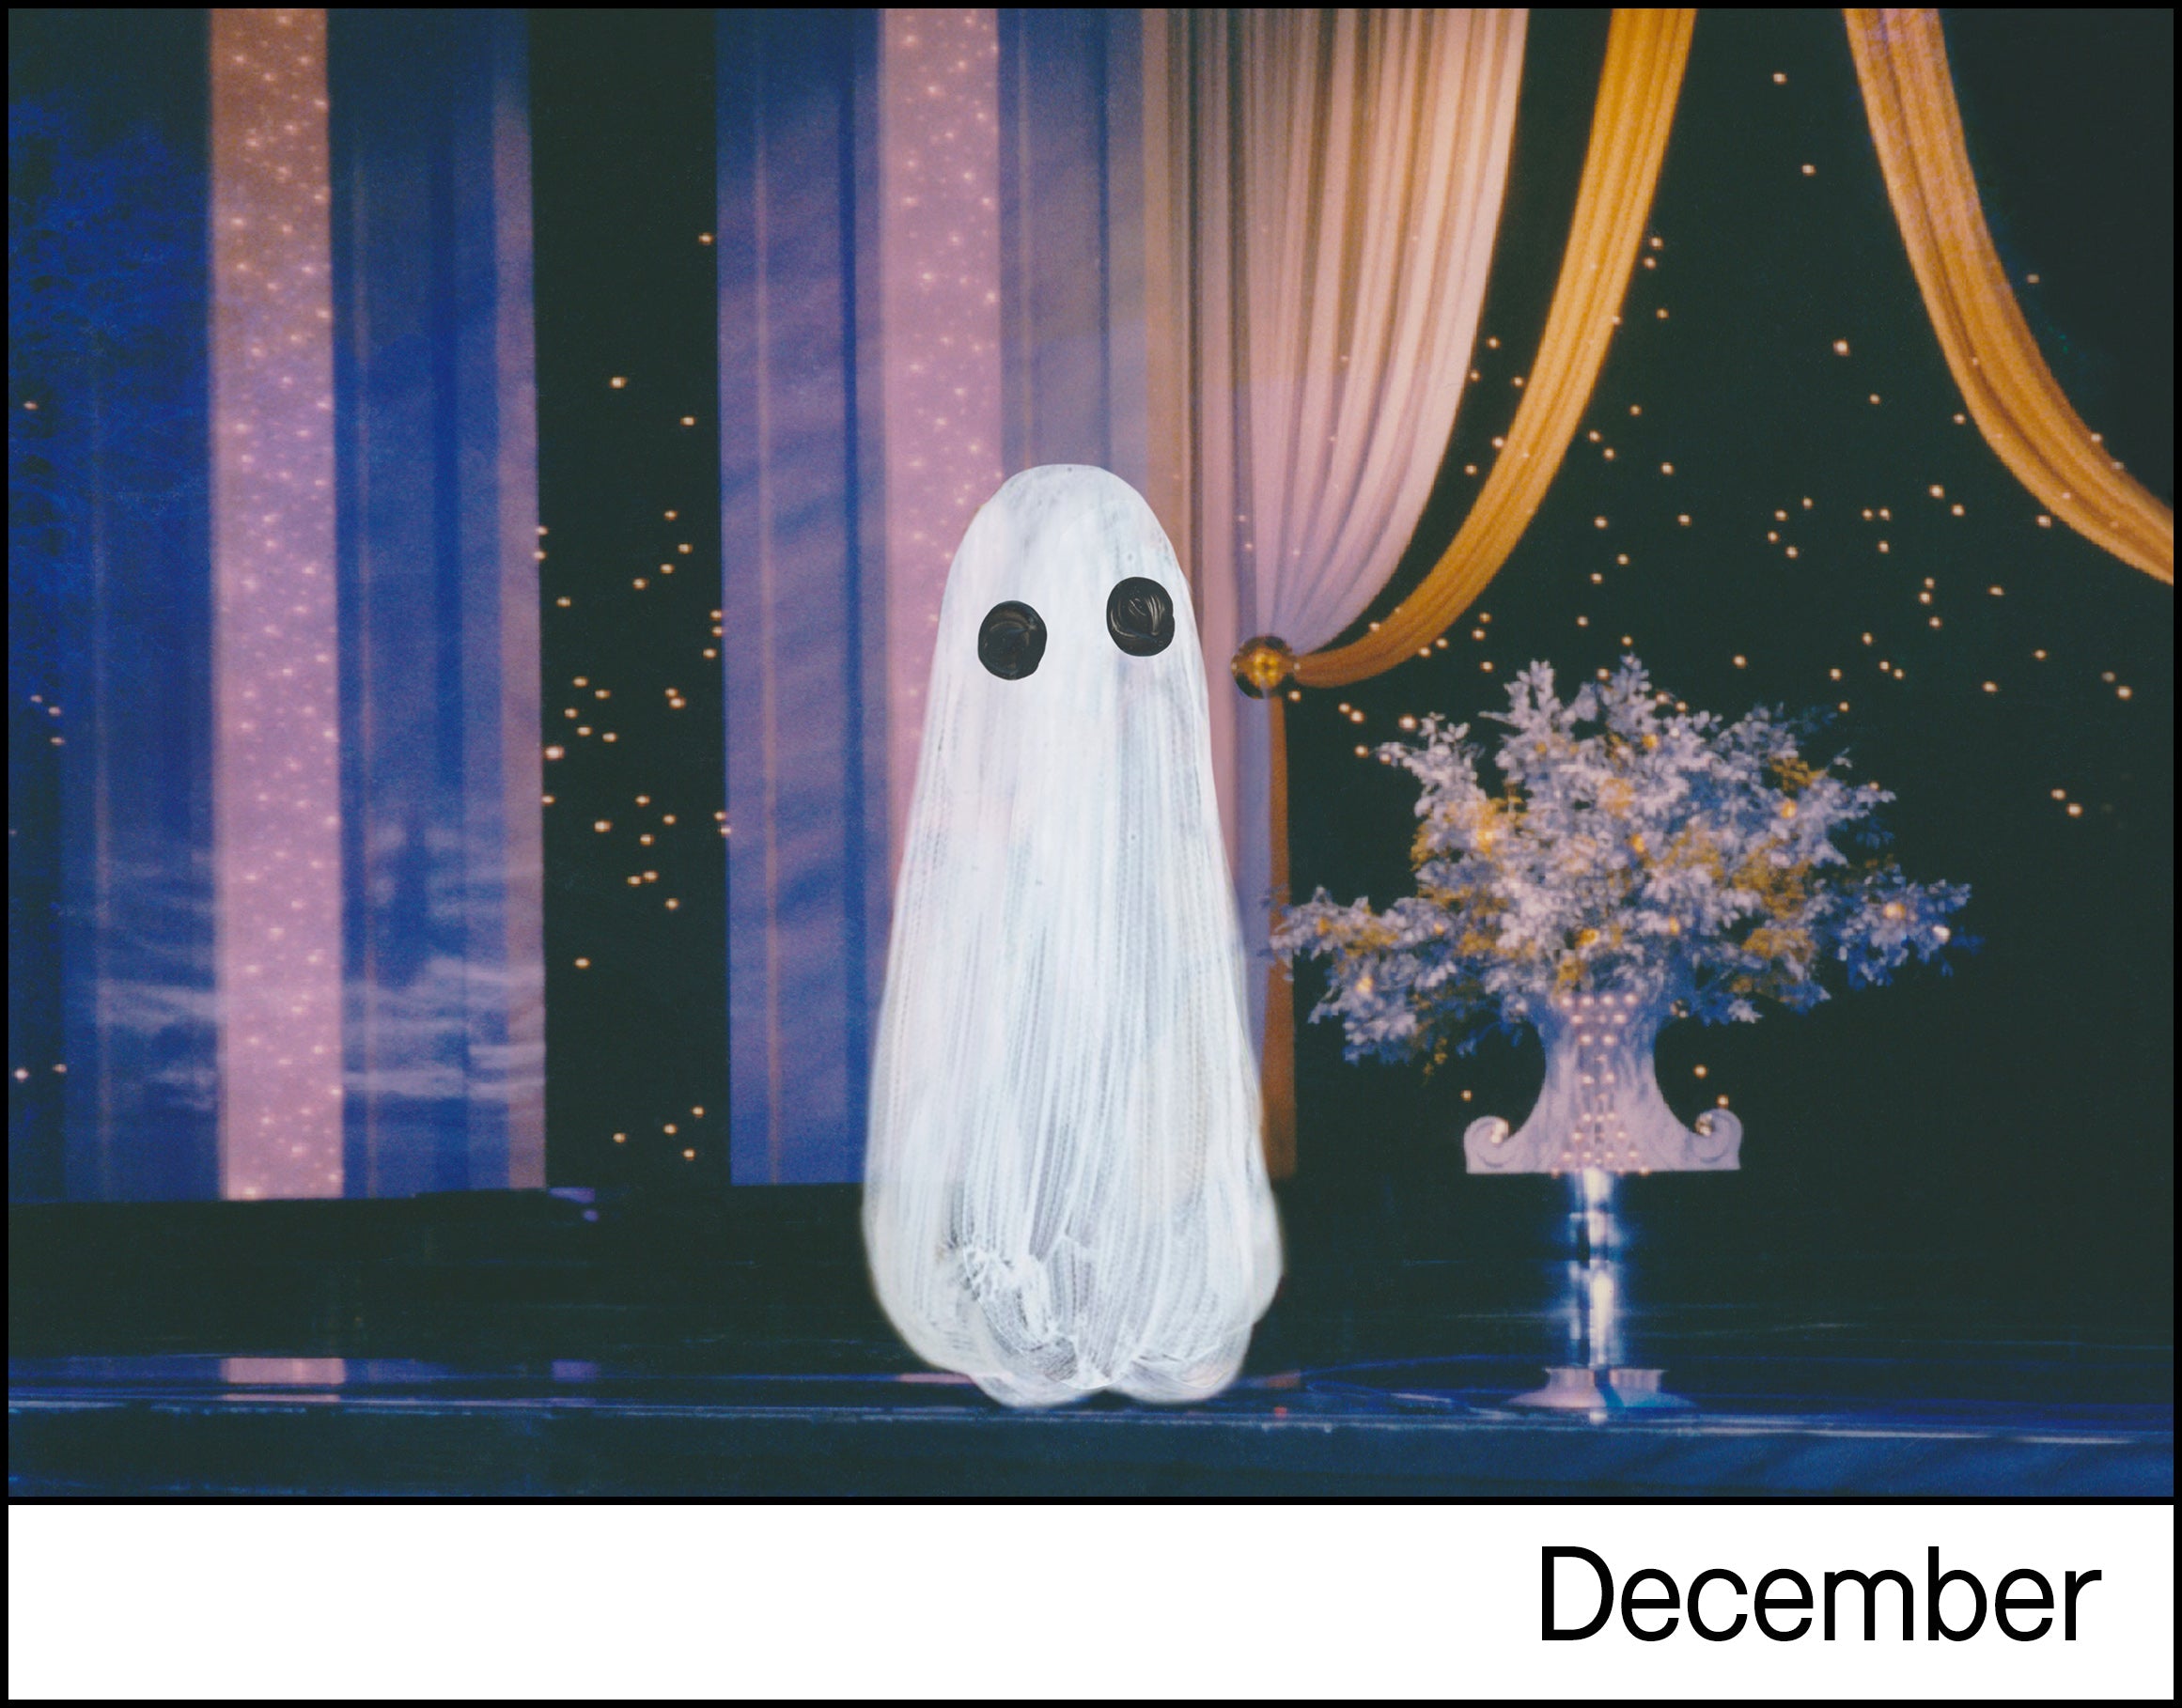 Ghost Photographs Calendar - First run SOLD OUT - Backorder available, shipping 12/15